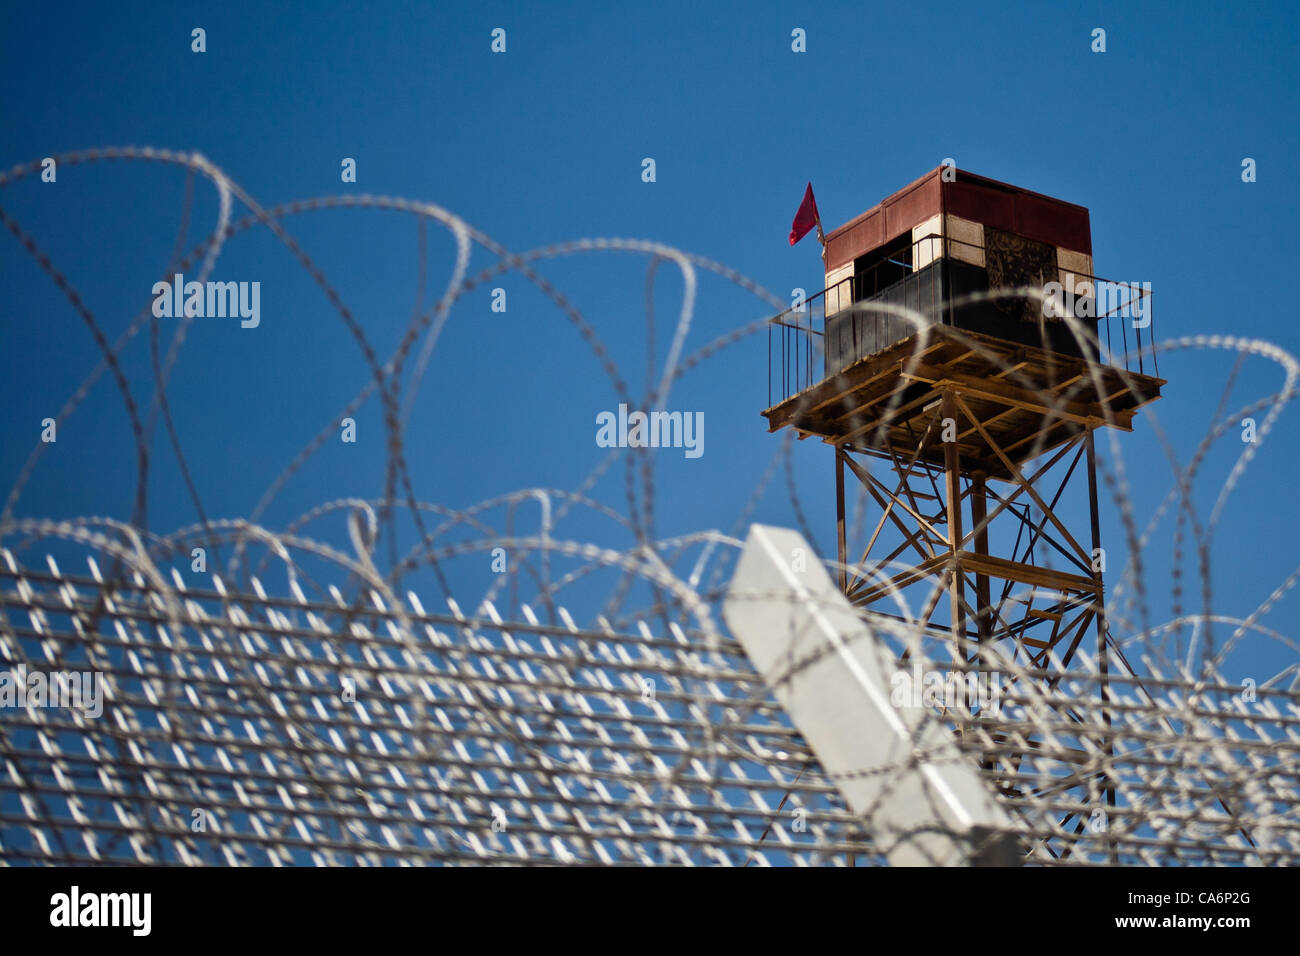 File photo: Egyptian military lookout post on Egyptian side of border adjacent to new Hour Glass fence erected on Israeli side. Negev, Israel. 3-Apr-2012. Stock Photo